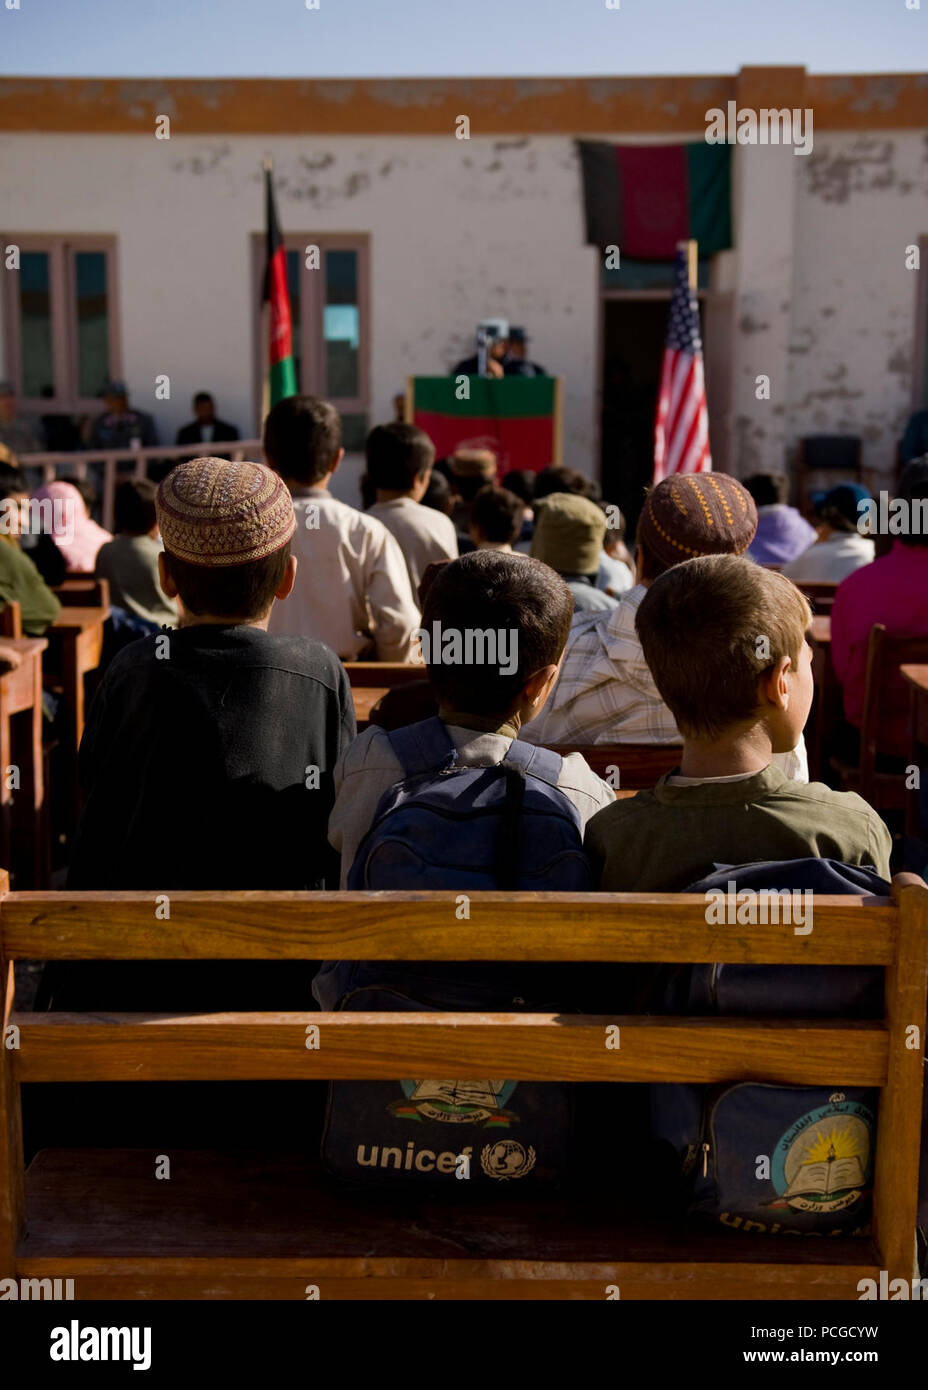 At an elementary school near Kandahar Air Field, children sit during a visit from local police and coalition leaders. Both spoke to the children on the importance of education and good behavior before handing out school supplies. Stock Photo